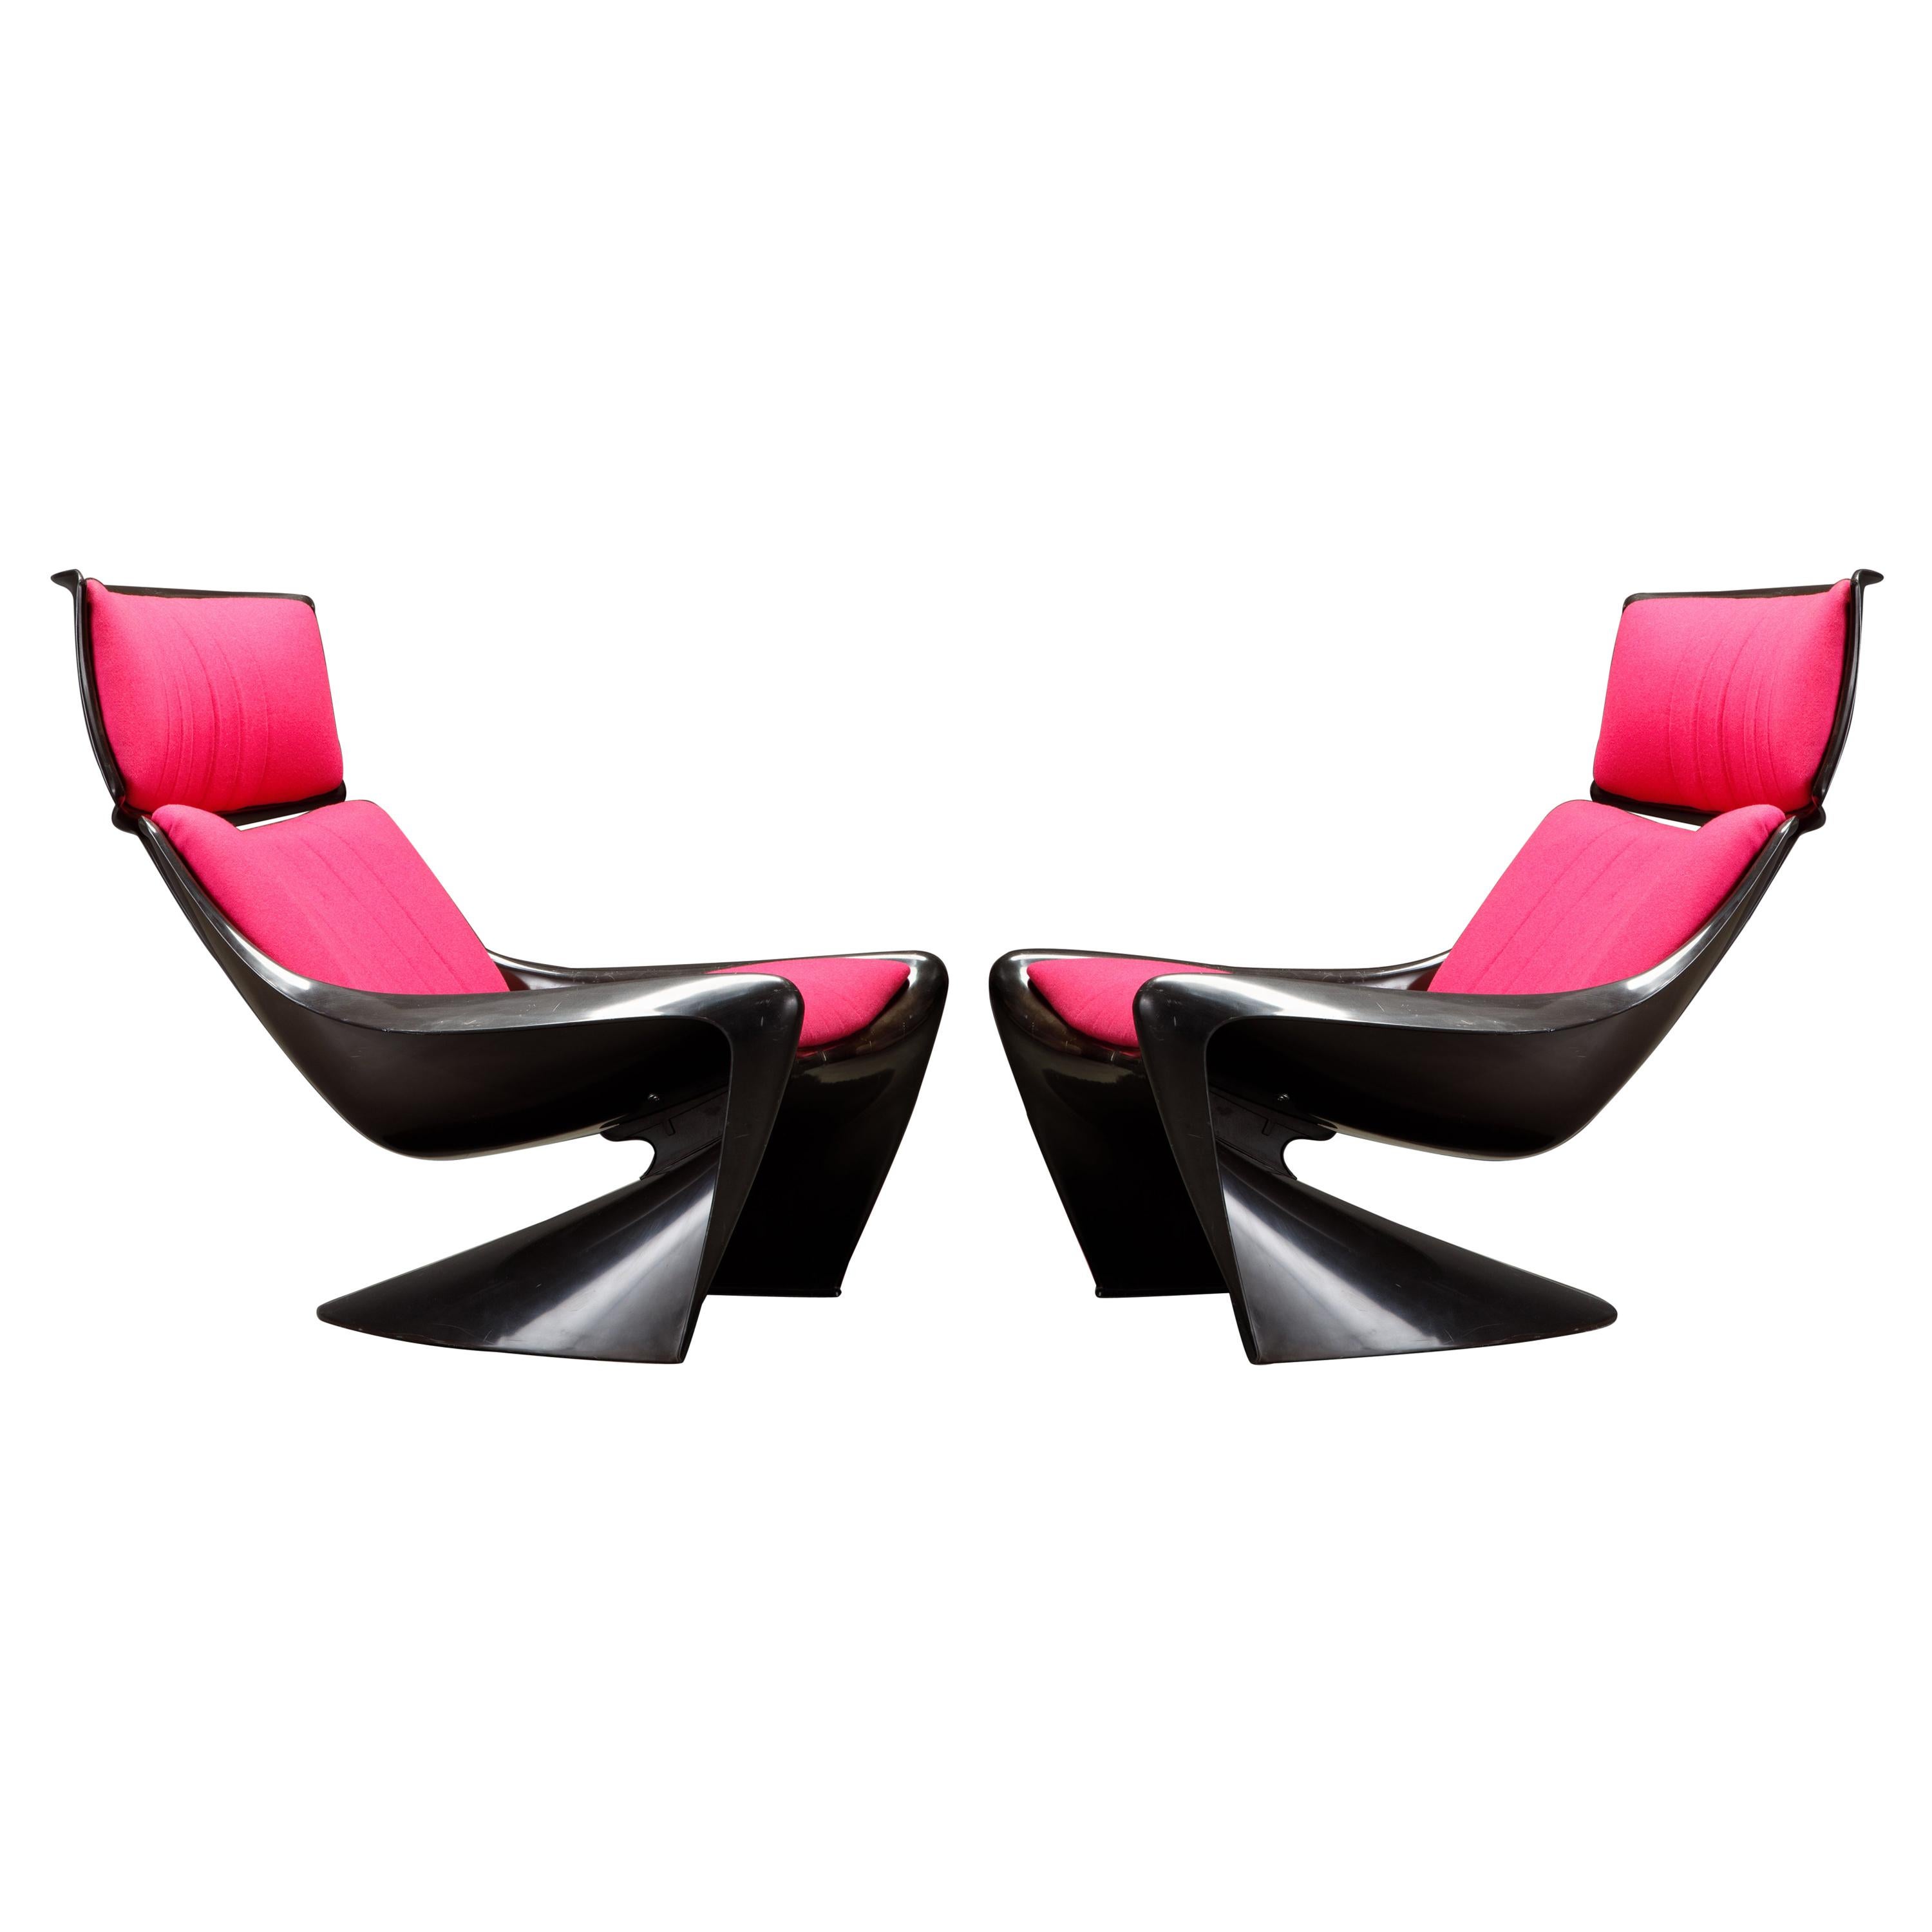 'President' Fiberglass Lounge Chairs by Steen Ostergaard for Cado, 1968, Signed 